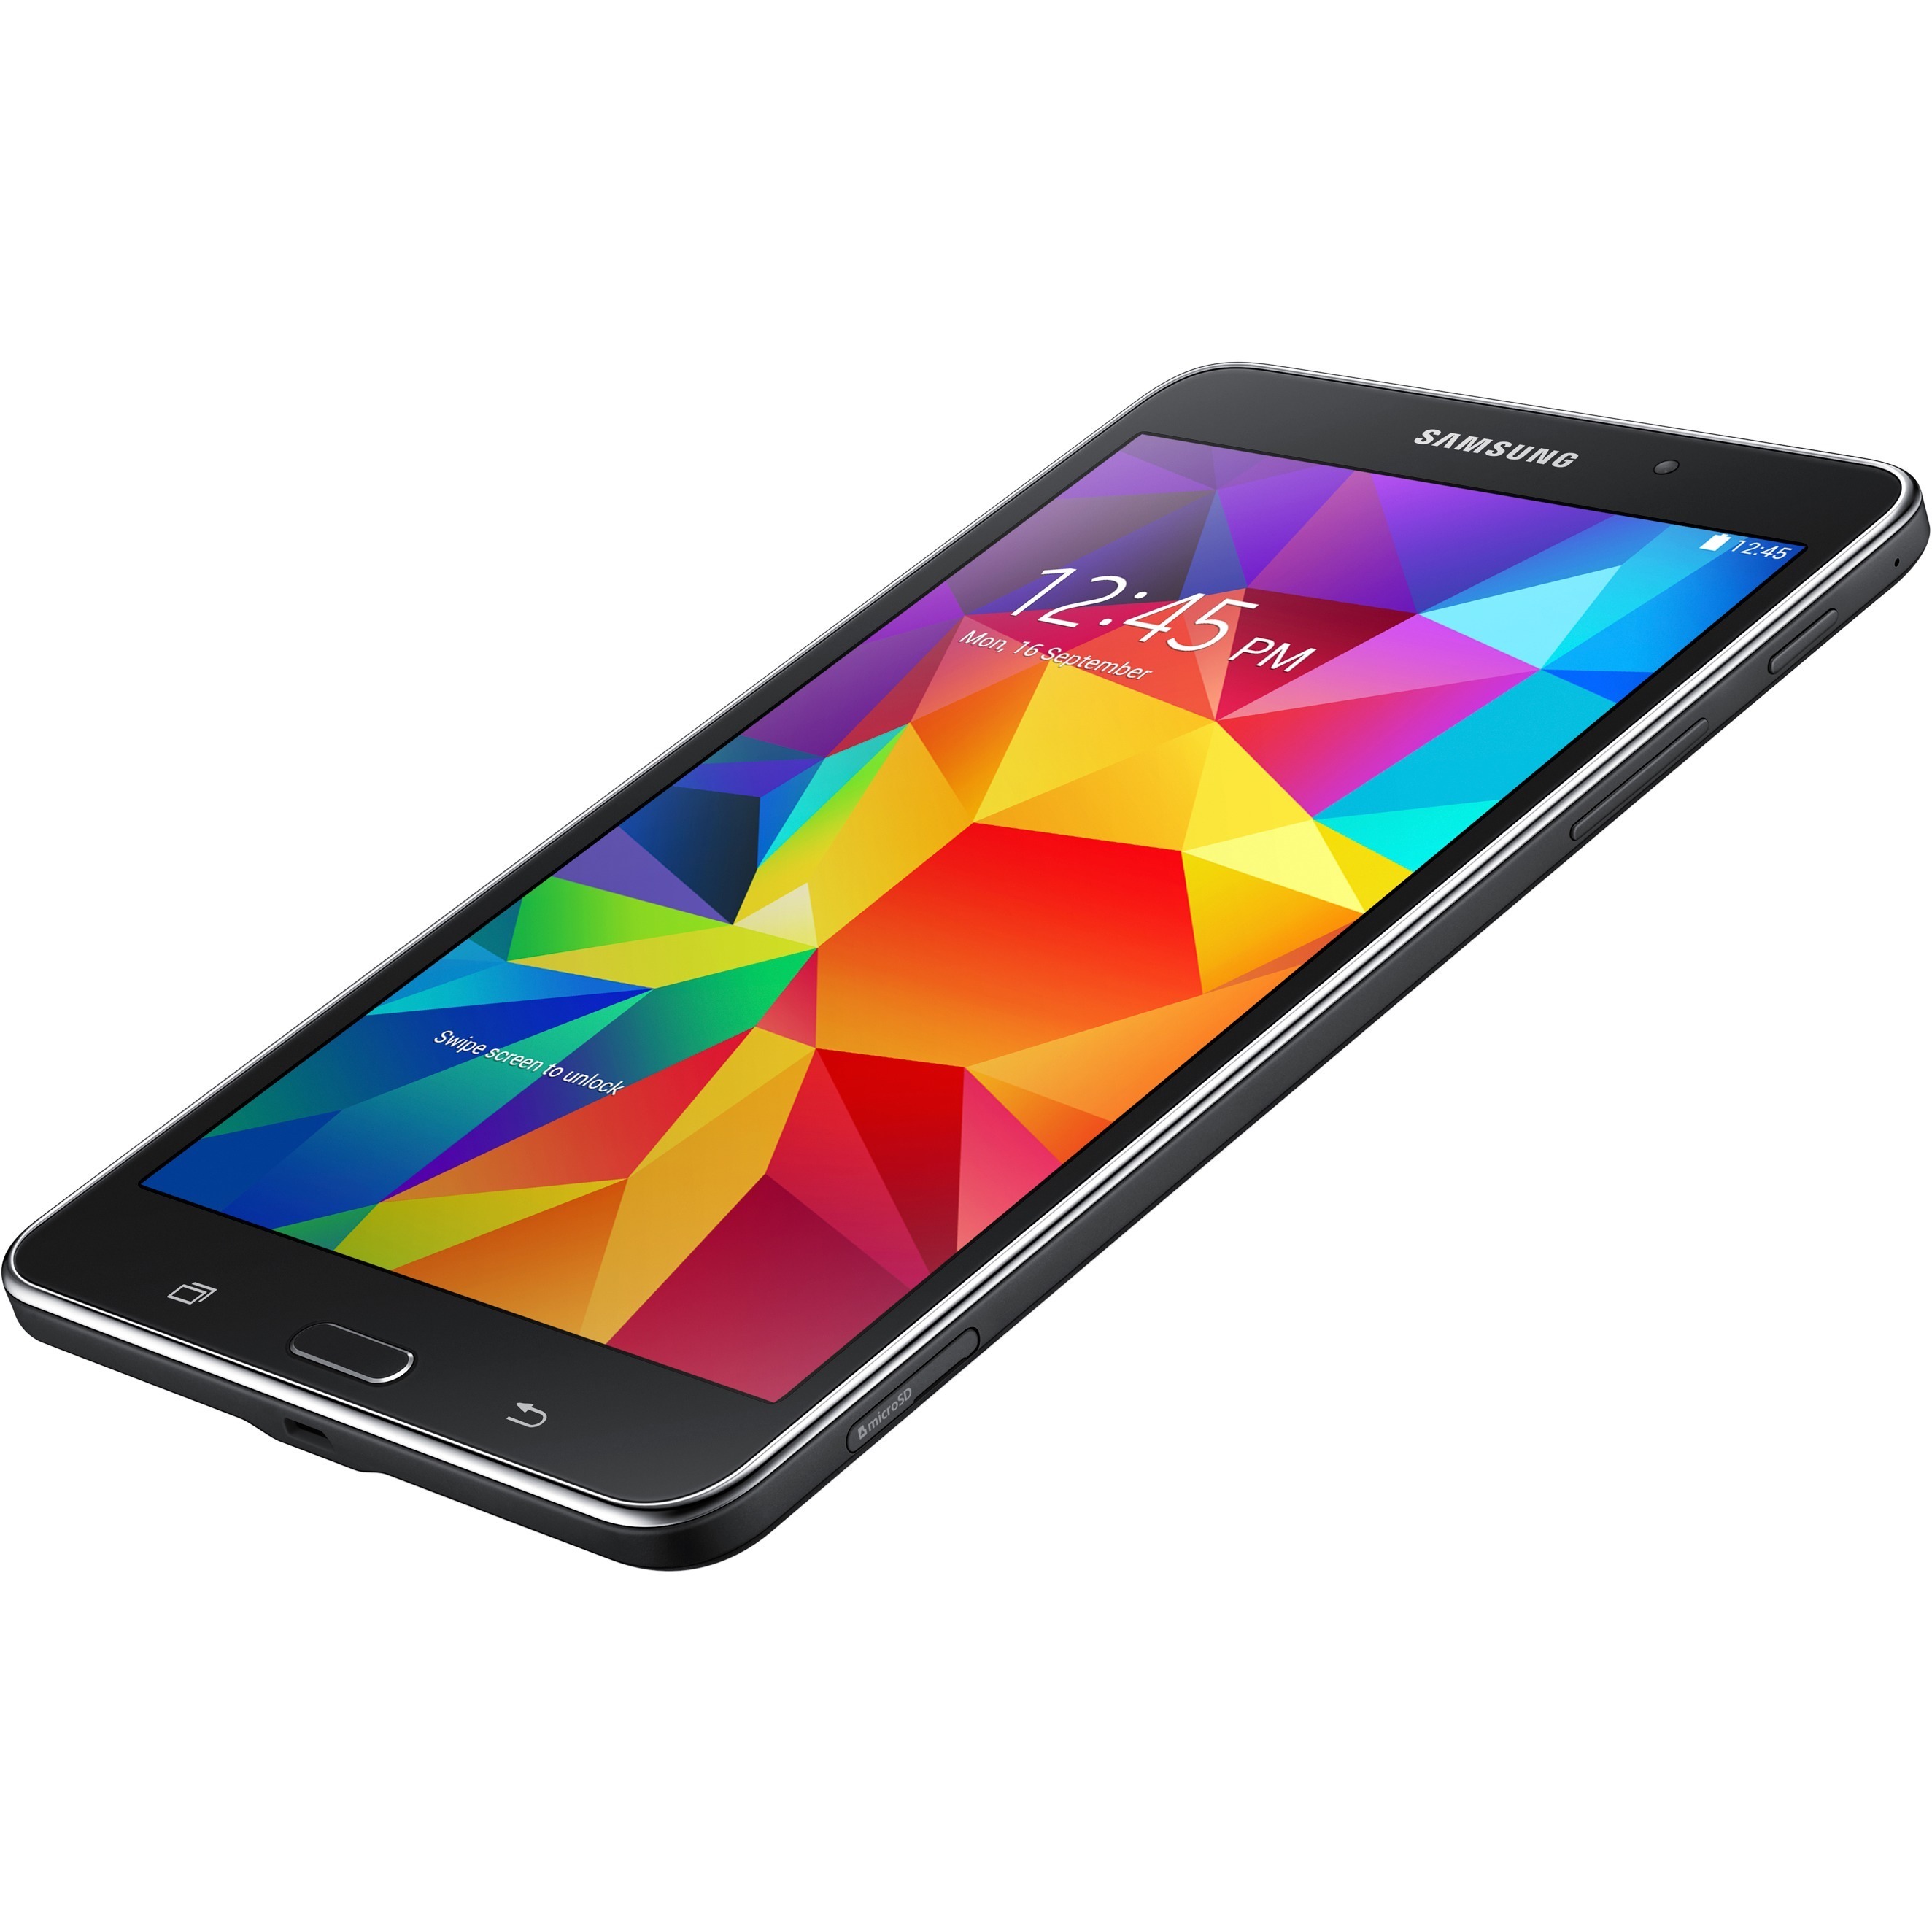 Samsung Galaxy Tab 4 - tablette - Android 4.4 (KitKat) - 16 Go